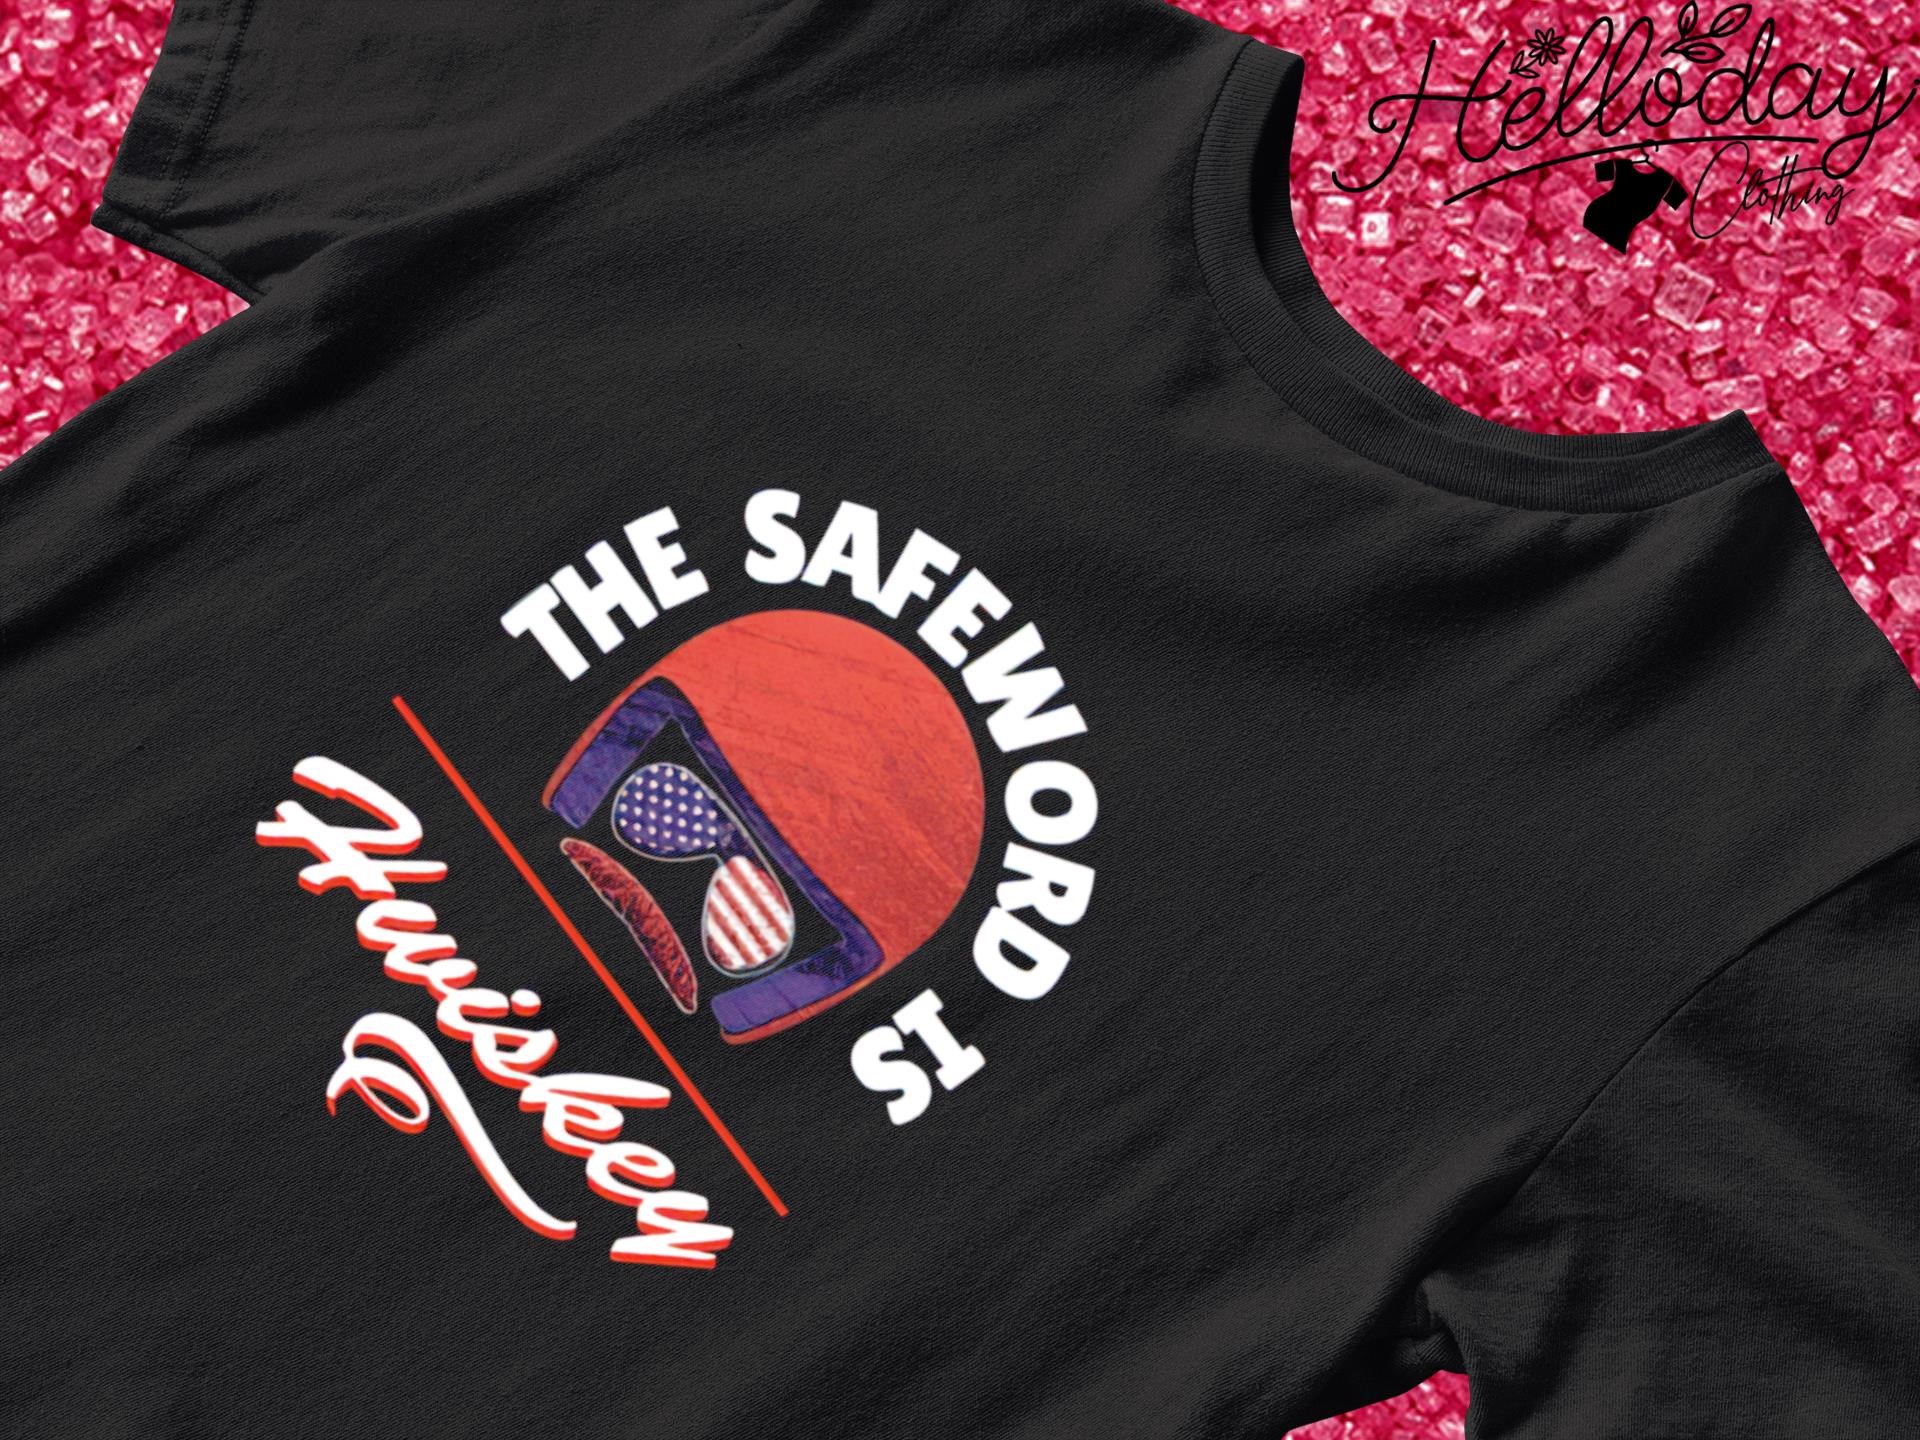 The safeword is Whiskey shirt